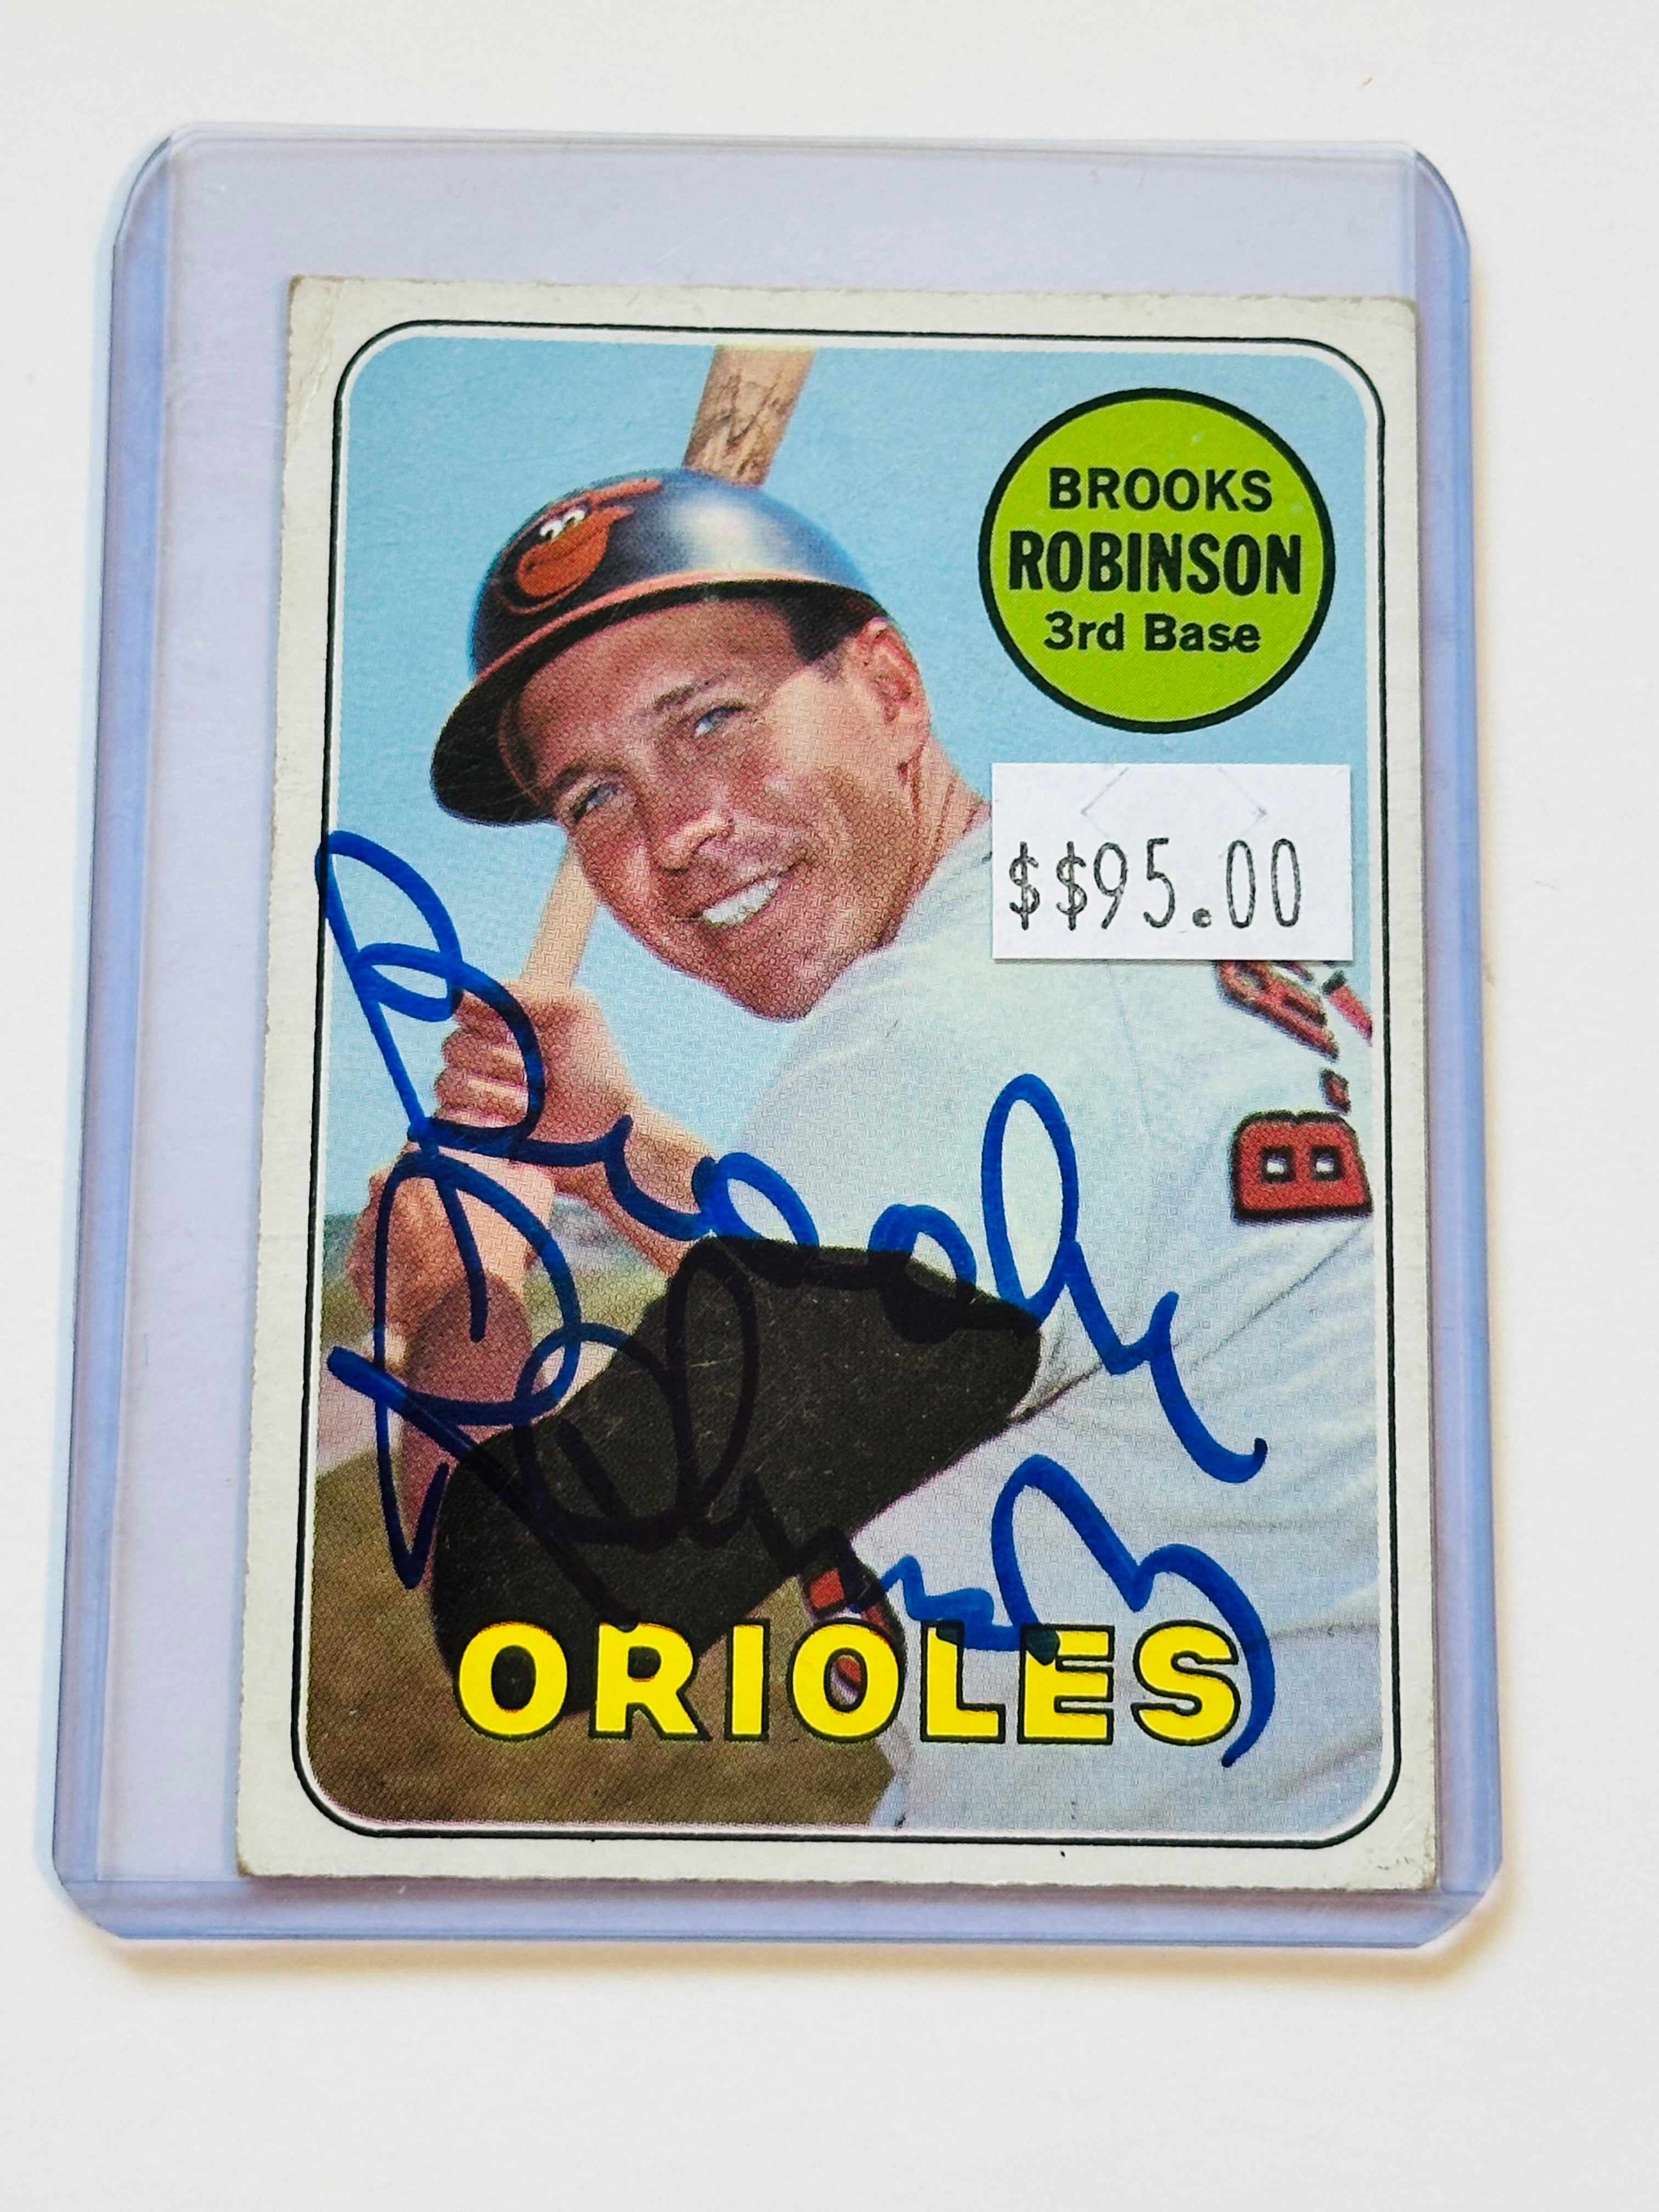 Brooks Robinson Baseball legend autograph card from 1969. Sold with COA